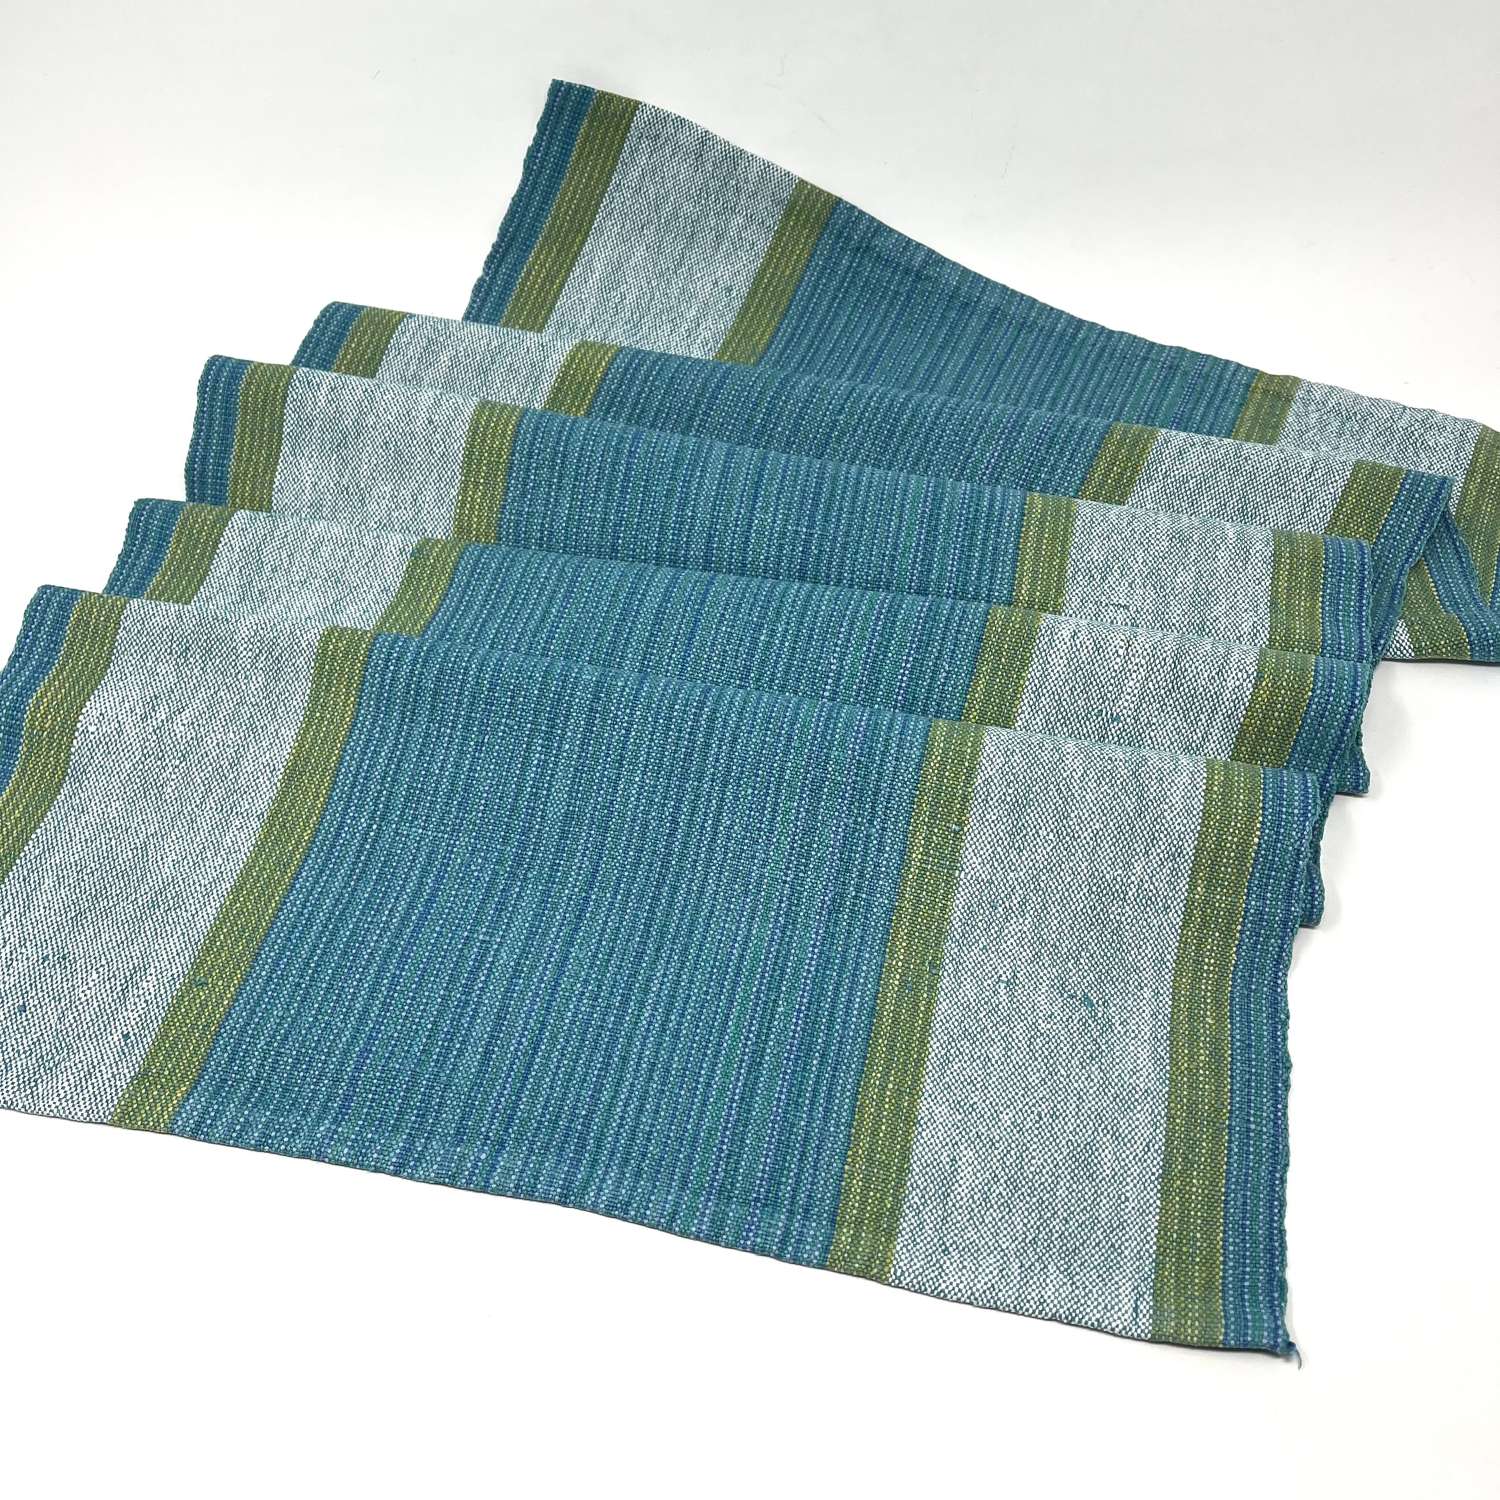 Handwoven vintage linen table runner in blues and greens, Sweden